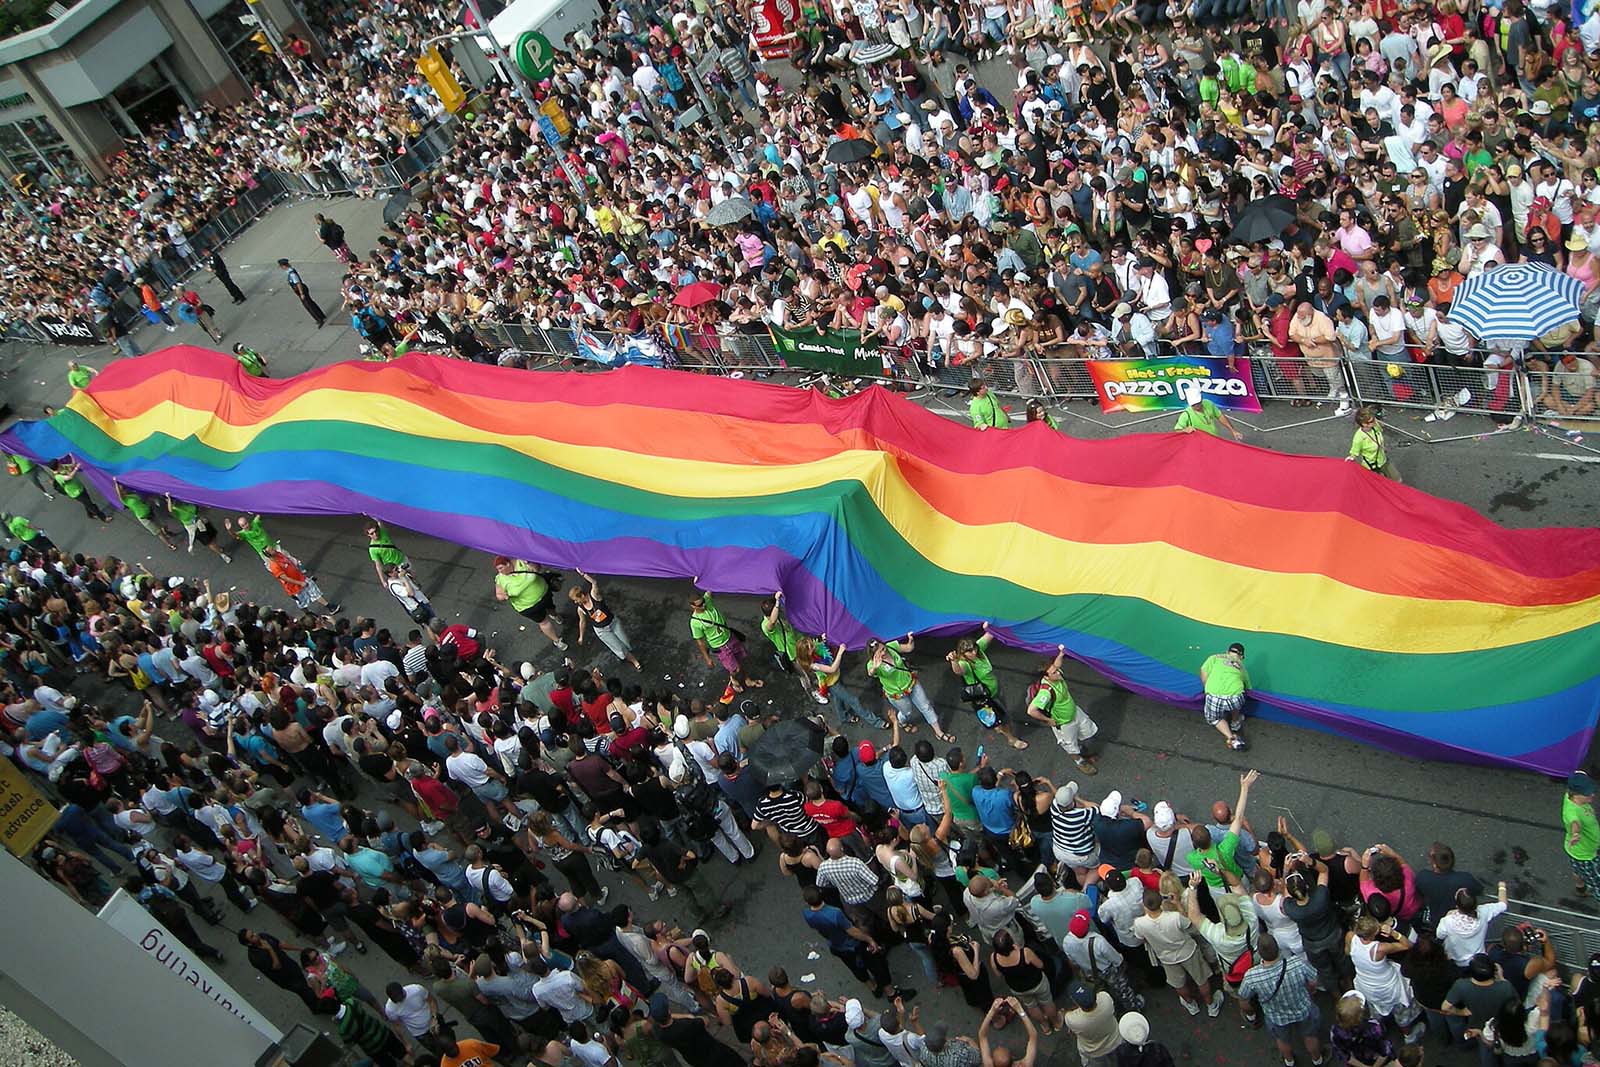 Photo looking down on a street with a long Pride flag being held by about 20 people. A crowd of people surround the flag on both sides of the street.